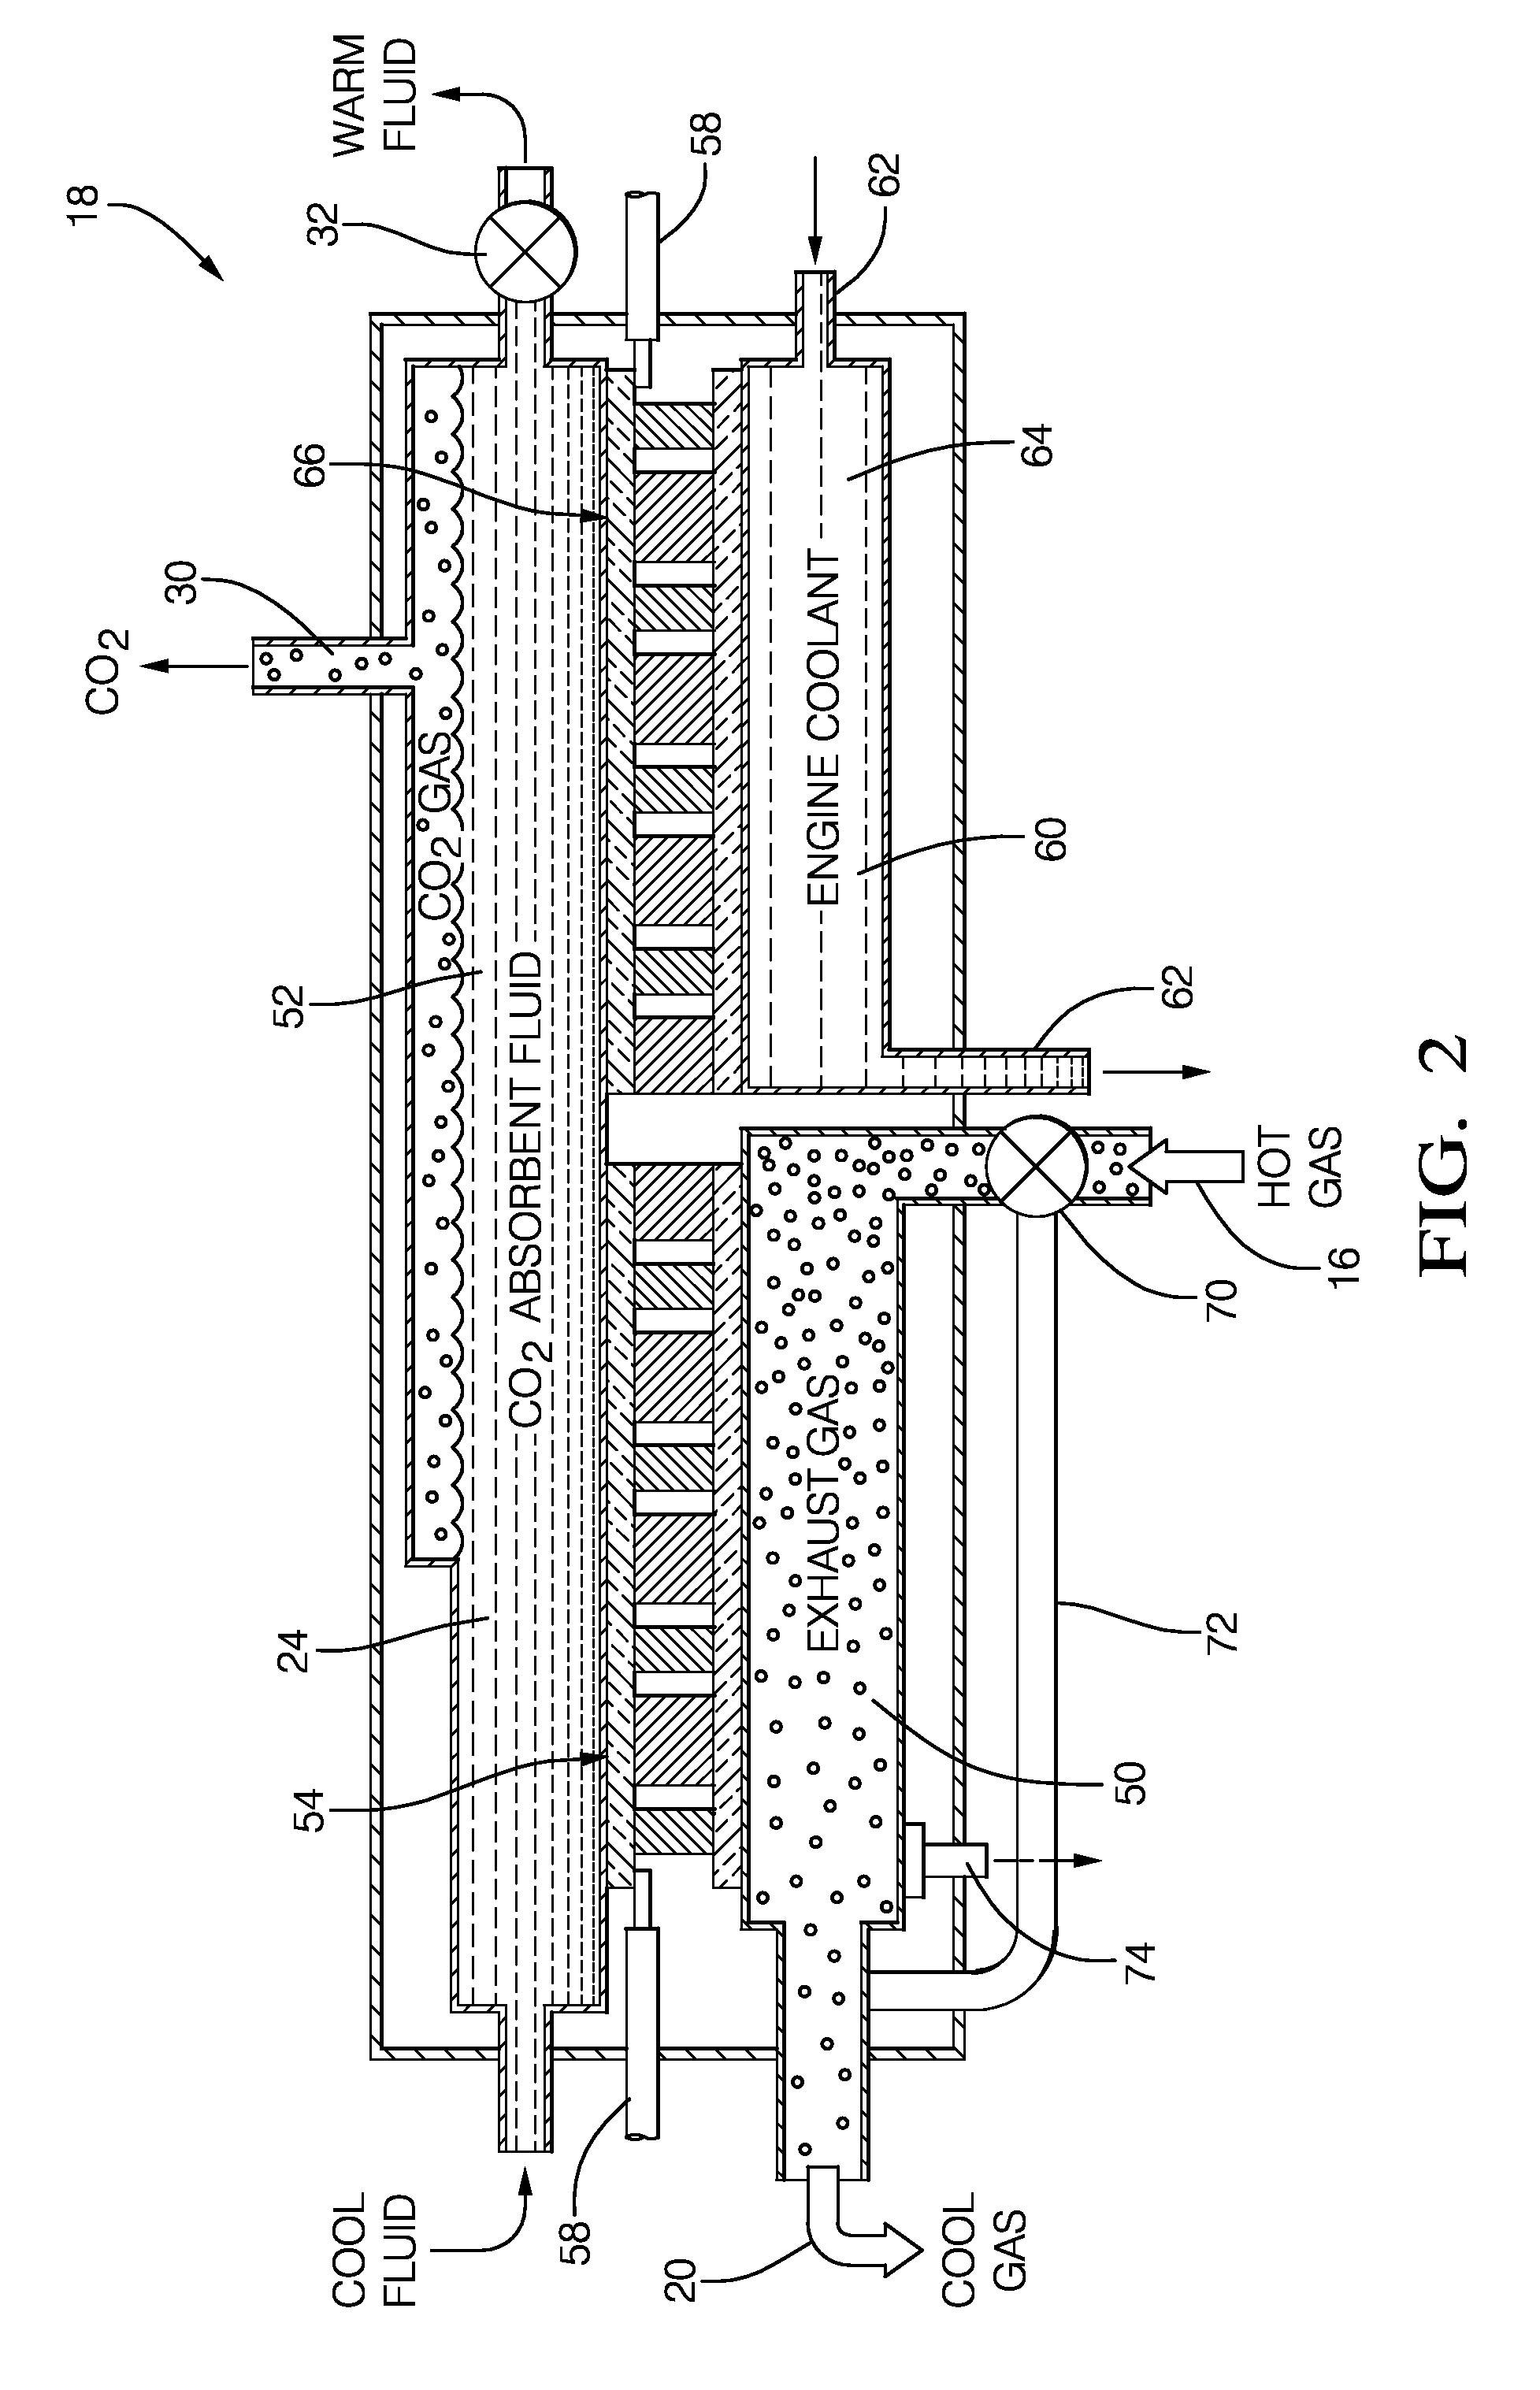 Heat exchanger equipped with thermal electric device for engine exhaust carbon dioxide collection system